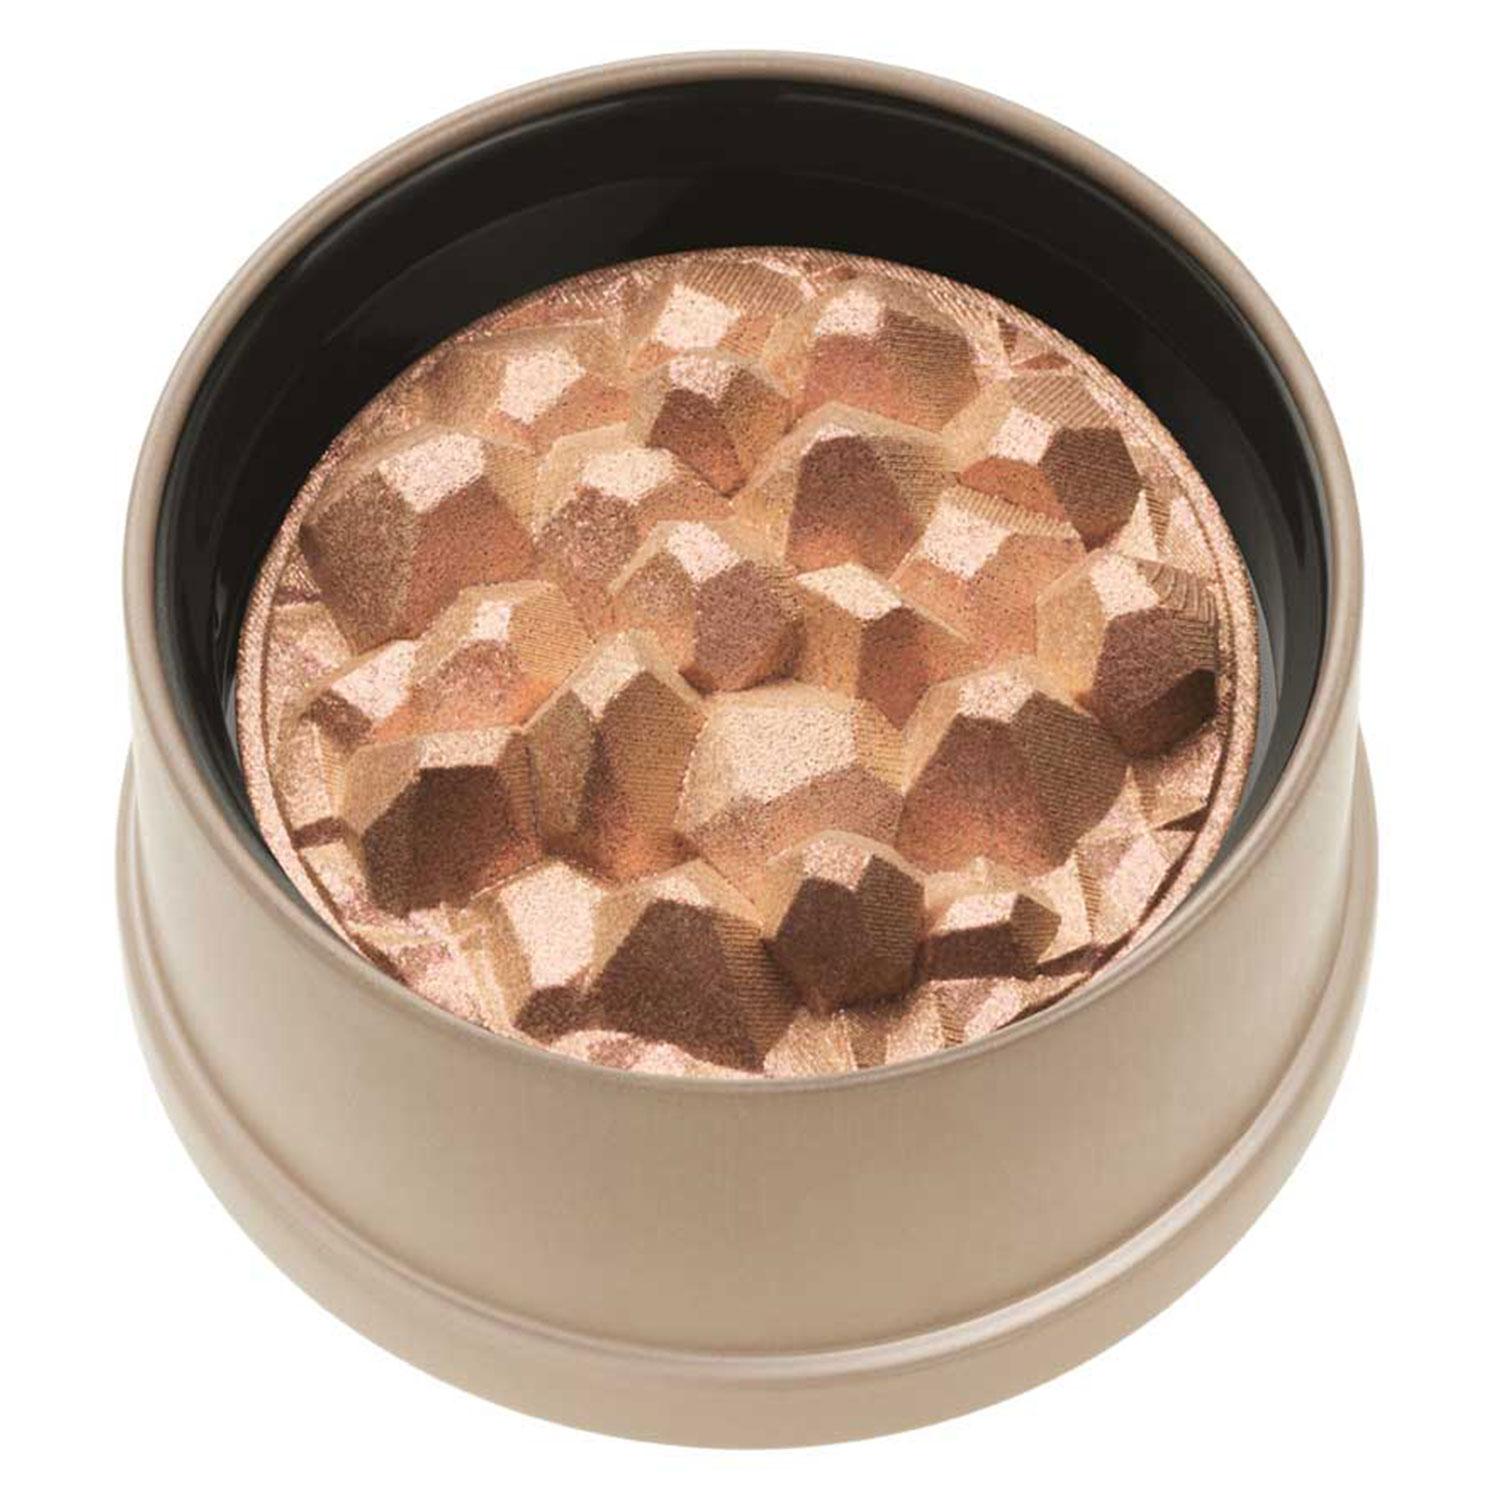 Stoned Vibes - Multi-Faceted Highlighter